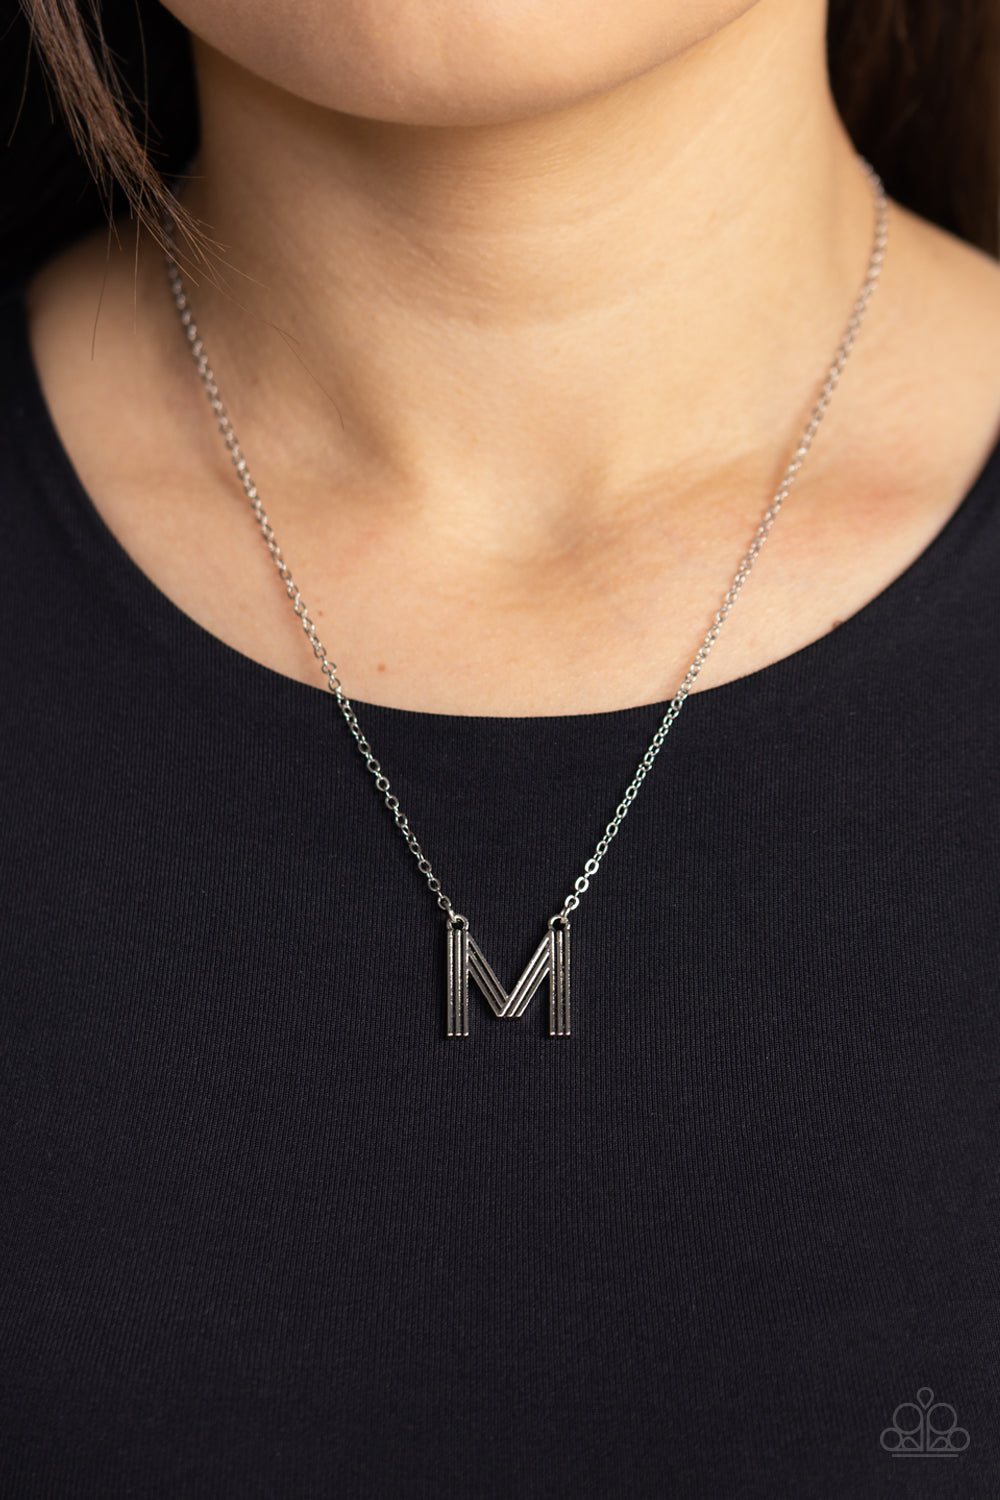 Leave Your Initials - Silver "M" Pendant Paparazzi Necklace & matching earrings